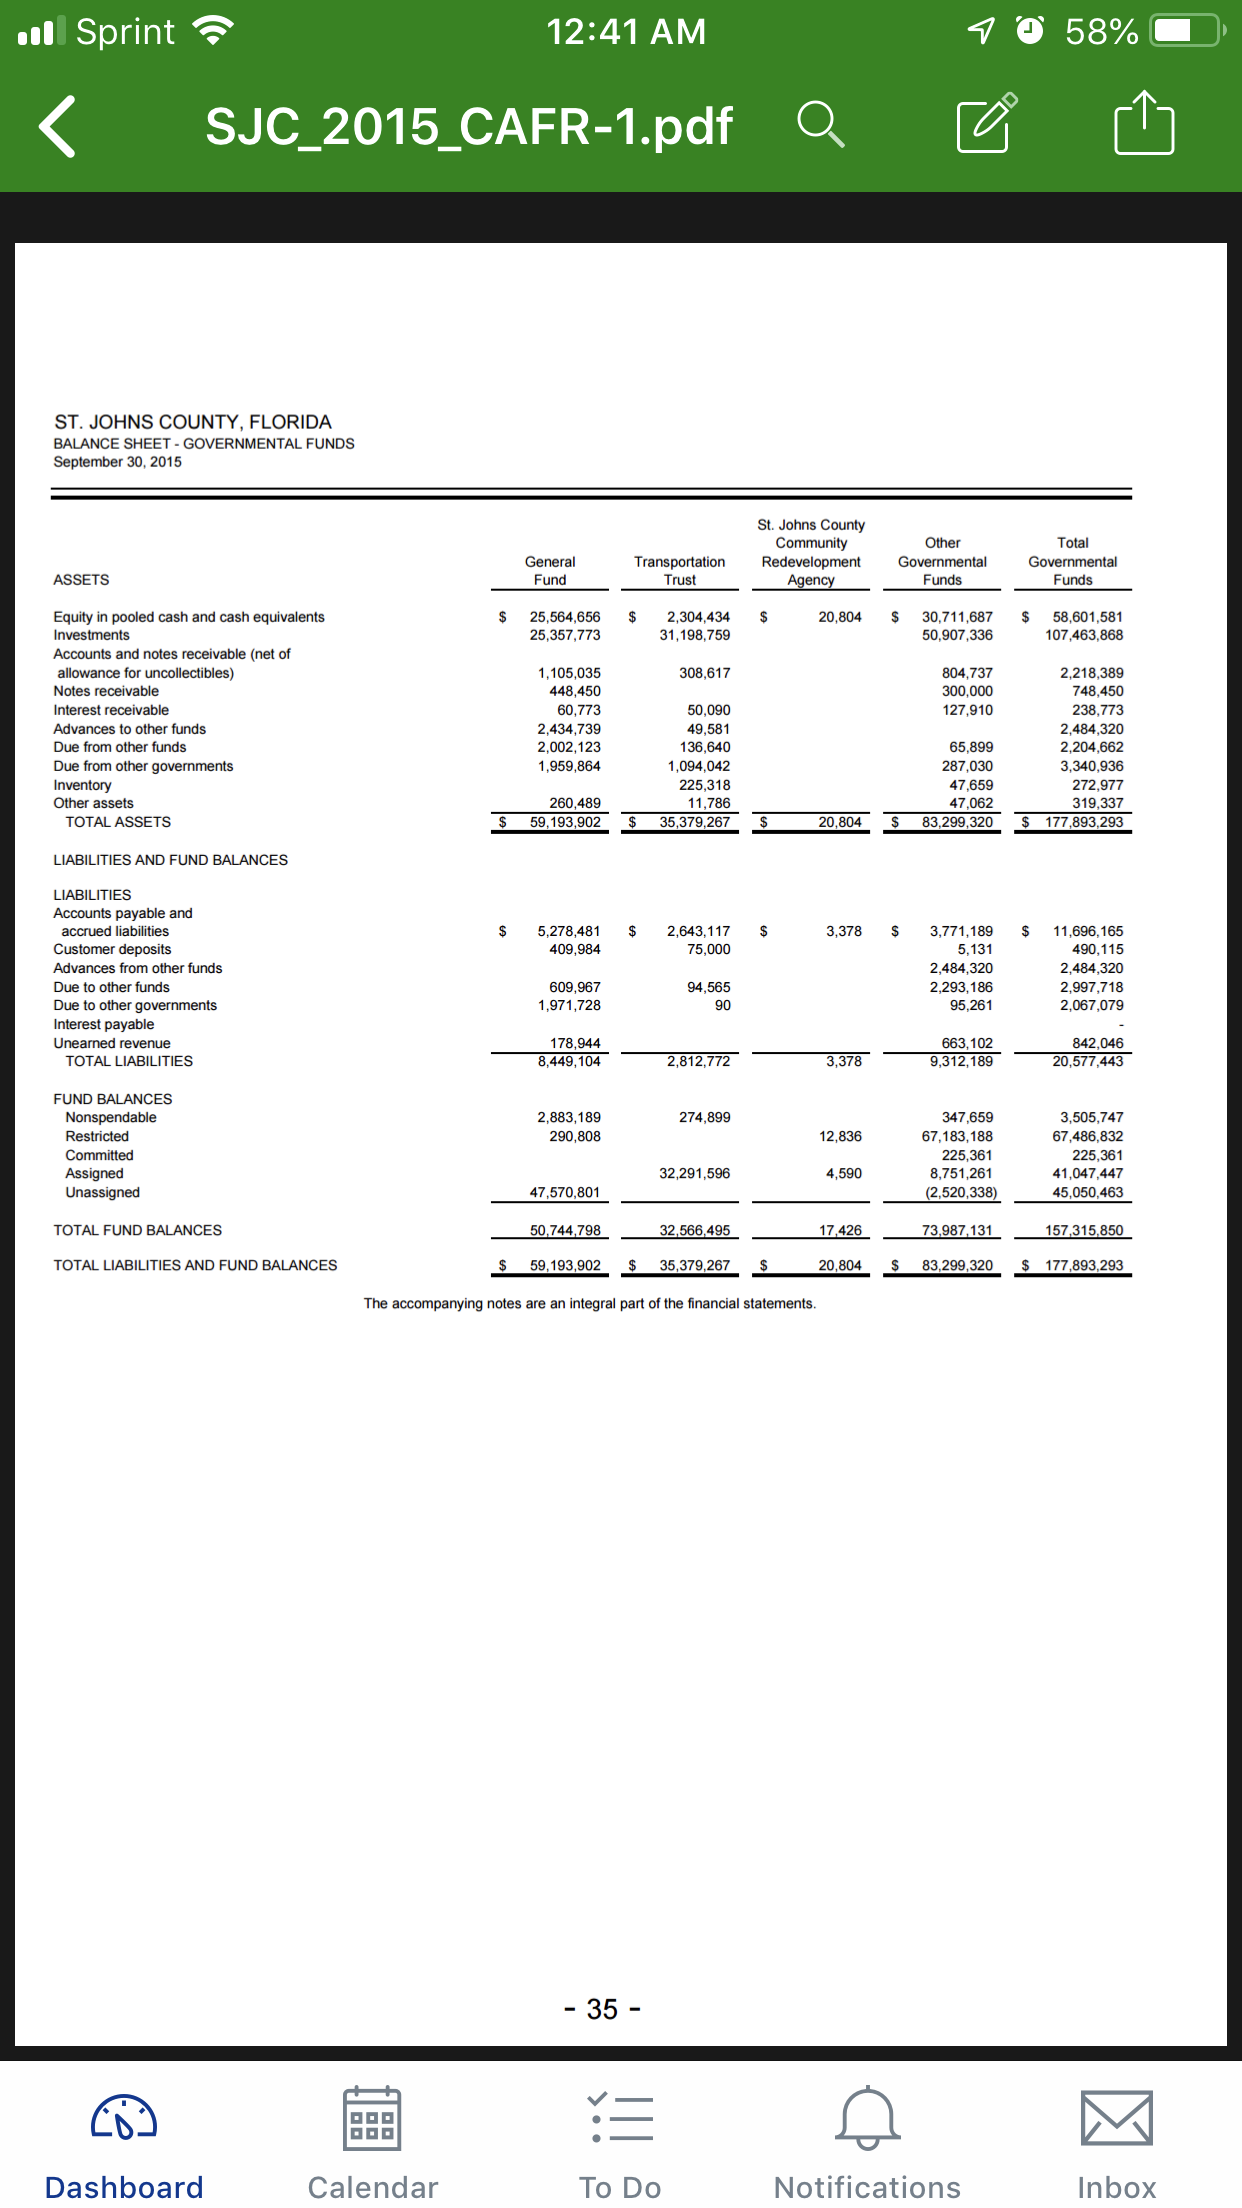 SJC 2015_CAFR-1.pdf Q
ST. JOHNS COUNTY, FLORIDA
BALANCE SHEET-GOVERNMENTAL FUNDS
September 30, 2015
St. Johns County
Community
Other
General
Transportation Redevelopment Governmental
Governmental
Funds
ASSETS
Trust
Funds
Equity in pooled cash and cash
Investments
Accounts and notes receivable (net of
allowance for uncollectibles)
Notes receivable
S 25,564,656 2,304,434 S
20,804 30,711,687 58,601,581
07 463,868
25,357,773
31,198,759
50,907,336
1,105,035
448,450
60,773
2,434,739
2,002,123
1,959,864
2,218,389
748.450
238,773
2.484,320
2,204,662
3,340,936
272,977
319,337
177,893,293
308,617
804,737
300,000
127,910
t receivable
Advances to other funds
Due from other funds
Due from other governments
Inventory
Other assets
50,090
49,581
136,640
1,094,042
225,318
65,899
260,489
S 59,193,902
47,659
47,062
83,299,320
TOTAL ASSETS
LIABILITIES AND FUND BALANCES
LIABILITIES
35,379,267 S
20,804
Accounts payable and
$ 5,278,481 2,643,117$
accrued liabilities
Customer deposits
Advances from other funds
Due to other funds
Due to other governments
3,378
3,771,189 11,696,165
115
2484,320
2,997,718
2,067,079
490,
131
2.484,320
2,293,186
95,261
409,984
75,000
609,967
1,971,728
94,565
90
Unearned revenue
178,944
663,102
8,449,1
842,046
20,577,443
TOTAL LIABILITIES
FUND BALANCES
ble
2,883,189
290,808
274,899
347,659
67,183,188
225,361
8,751,261
(2.520.338)
3,505,747
67,486,832
225,361
1,047,447
5,050,463
12,836
32,291,596
Unas
TOTAL FUND BALANCES
TOTAL LIABILITIES AND FUND BALANCES
47,570,801
50 744 798 32 566,495
73.987 131
157 315,850
S 59,193,902
35,379,267$
20,804
83,299,320 $177,893,293
The accompanying notes are an integral part of the financial statements
Dashboard
Calendar
Notifications
Inbox
